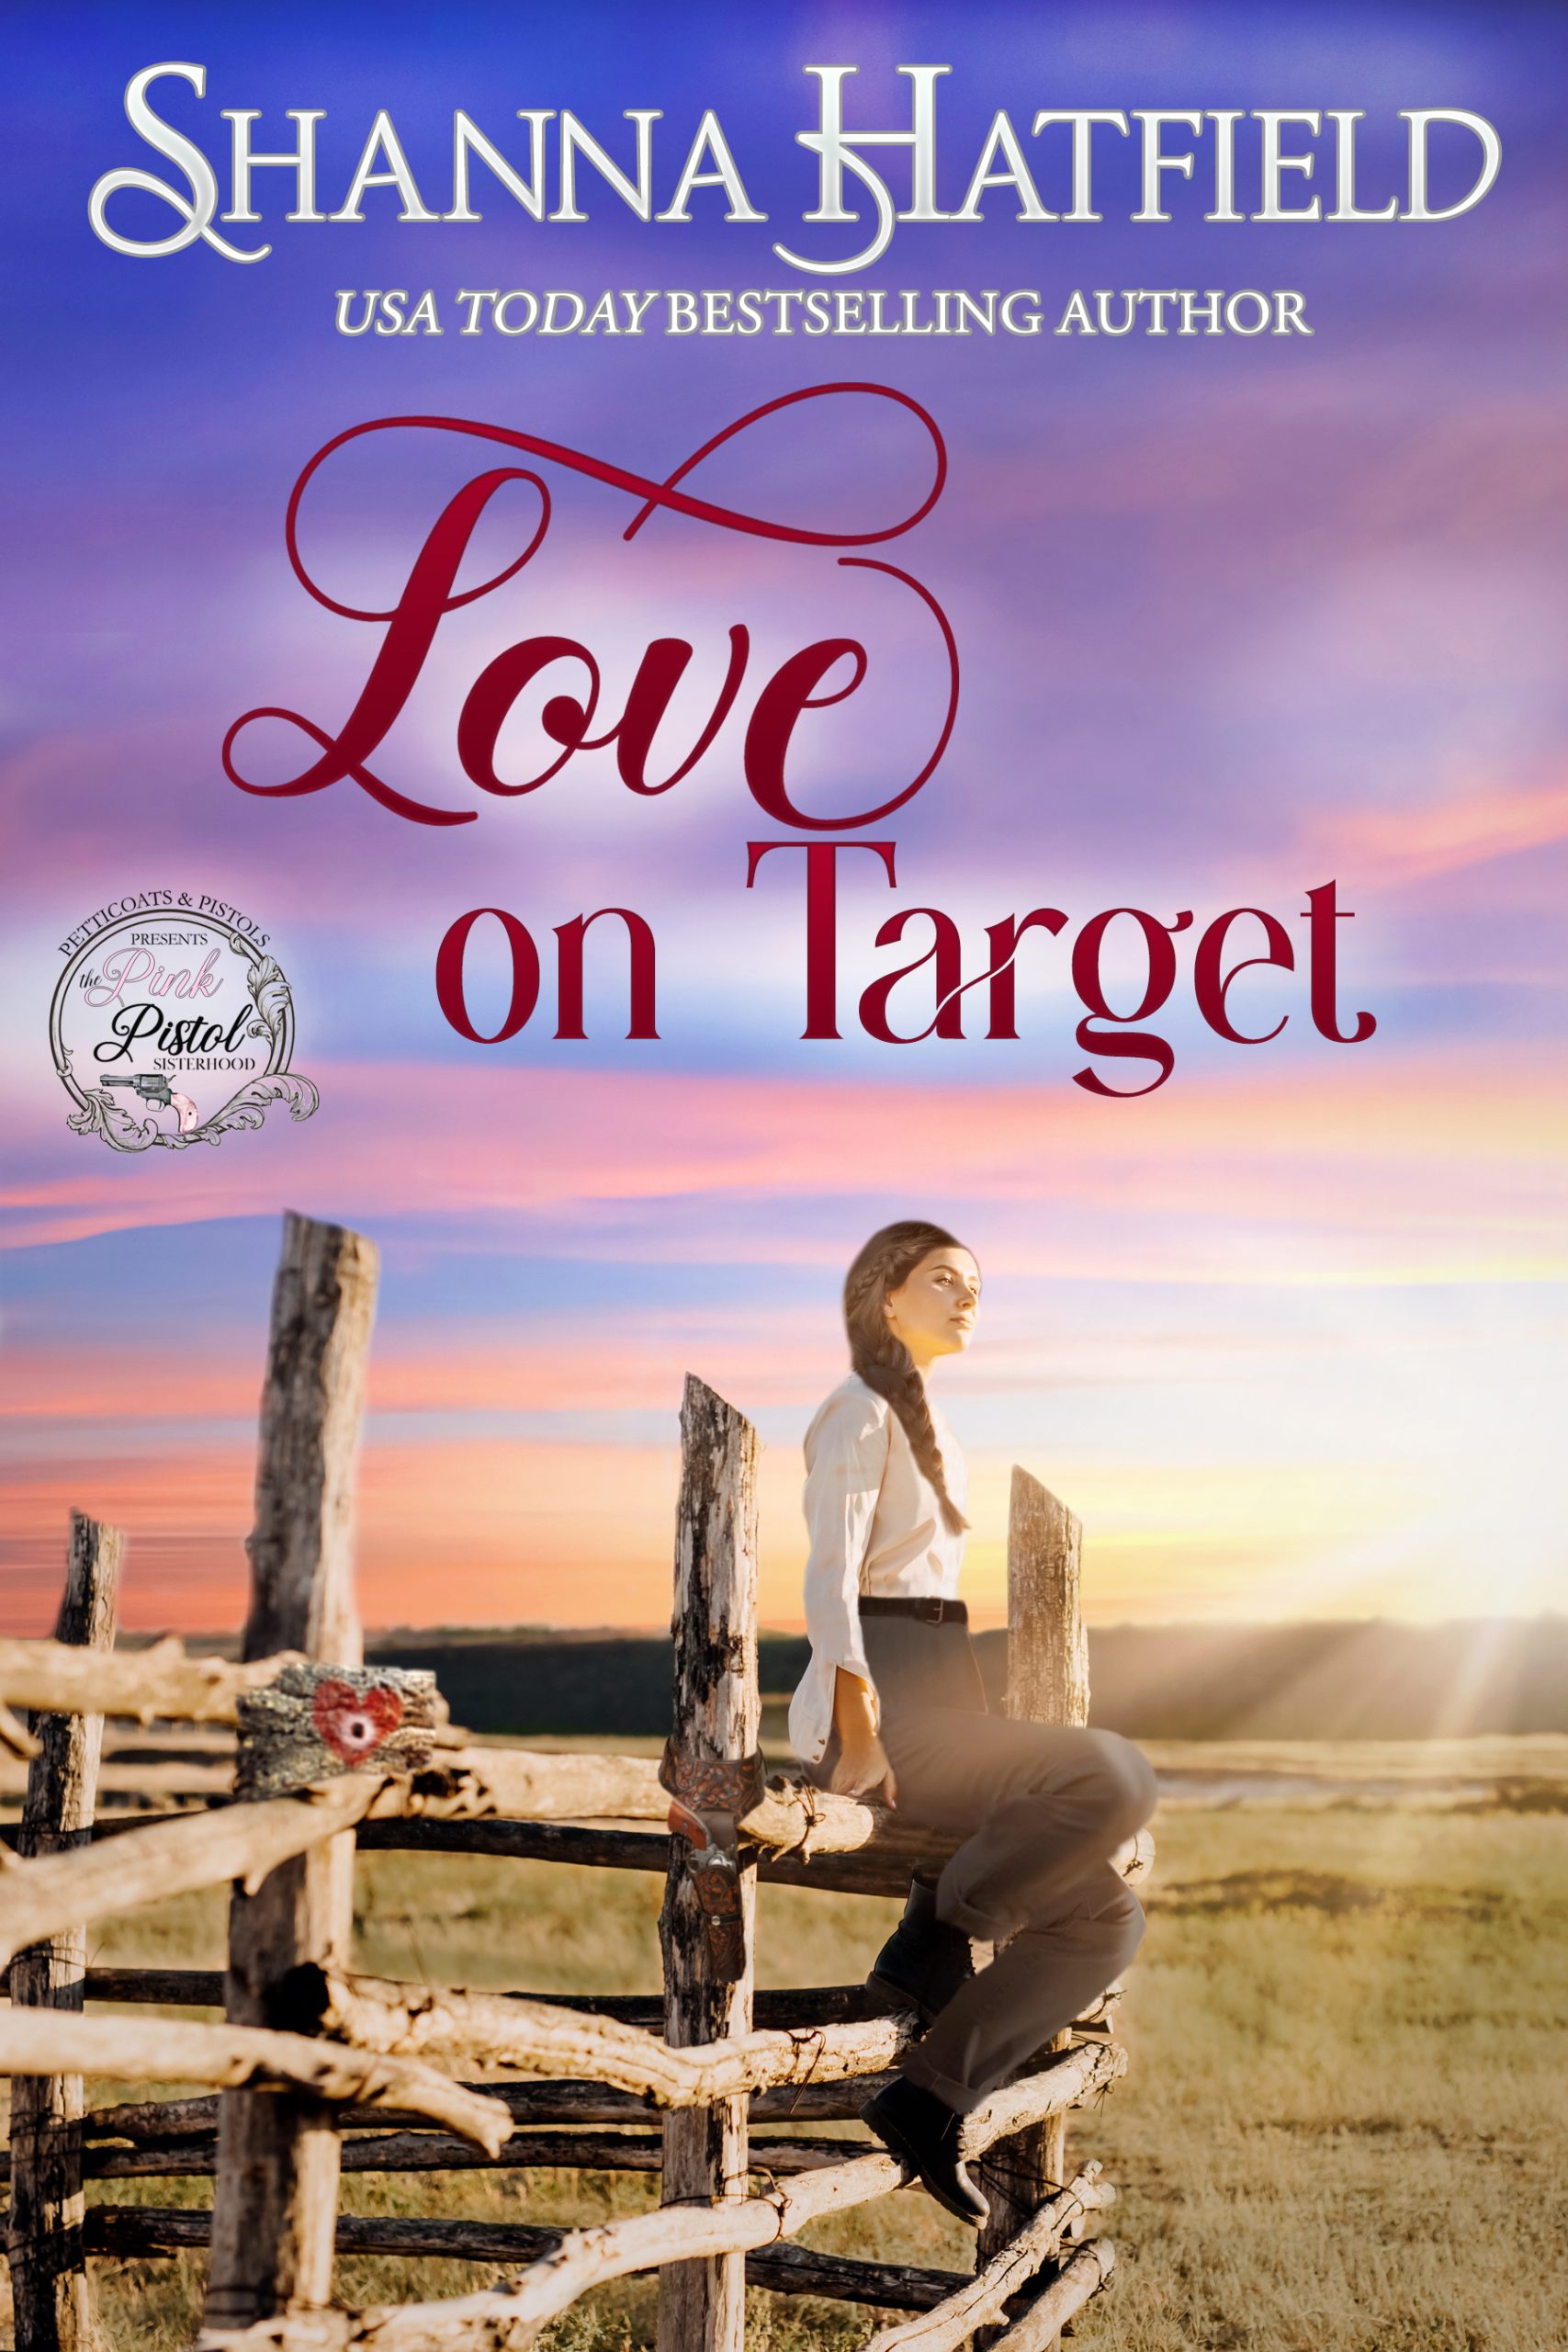 Love on Target by Shanna Hatfield PDF Download Audio Book